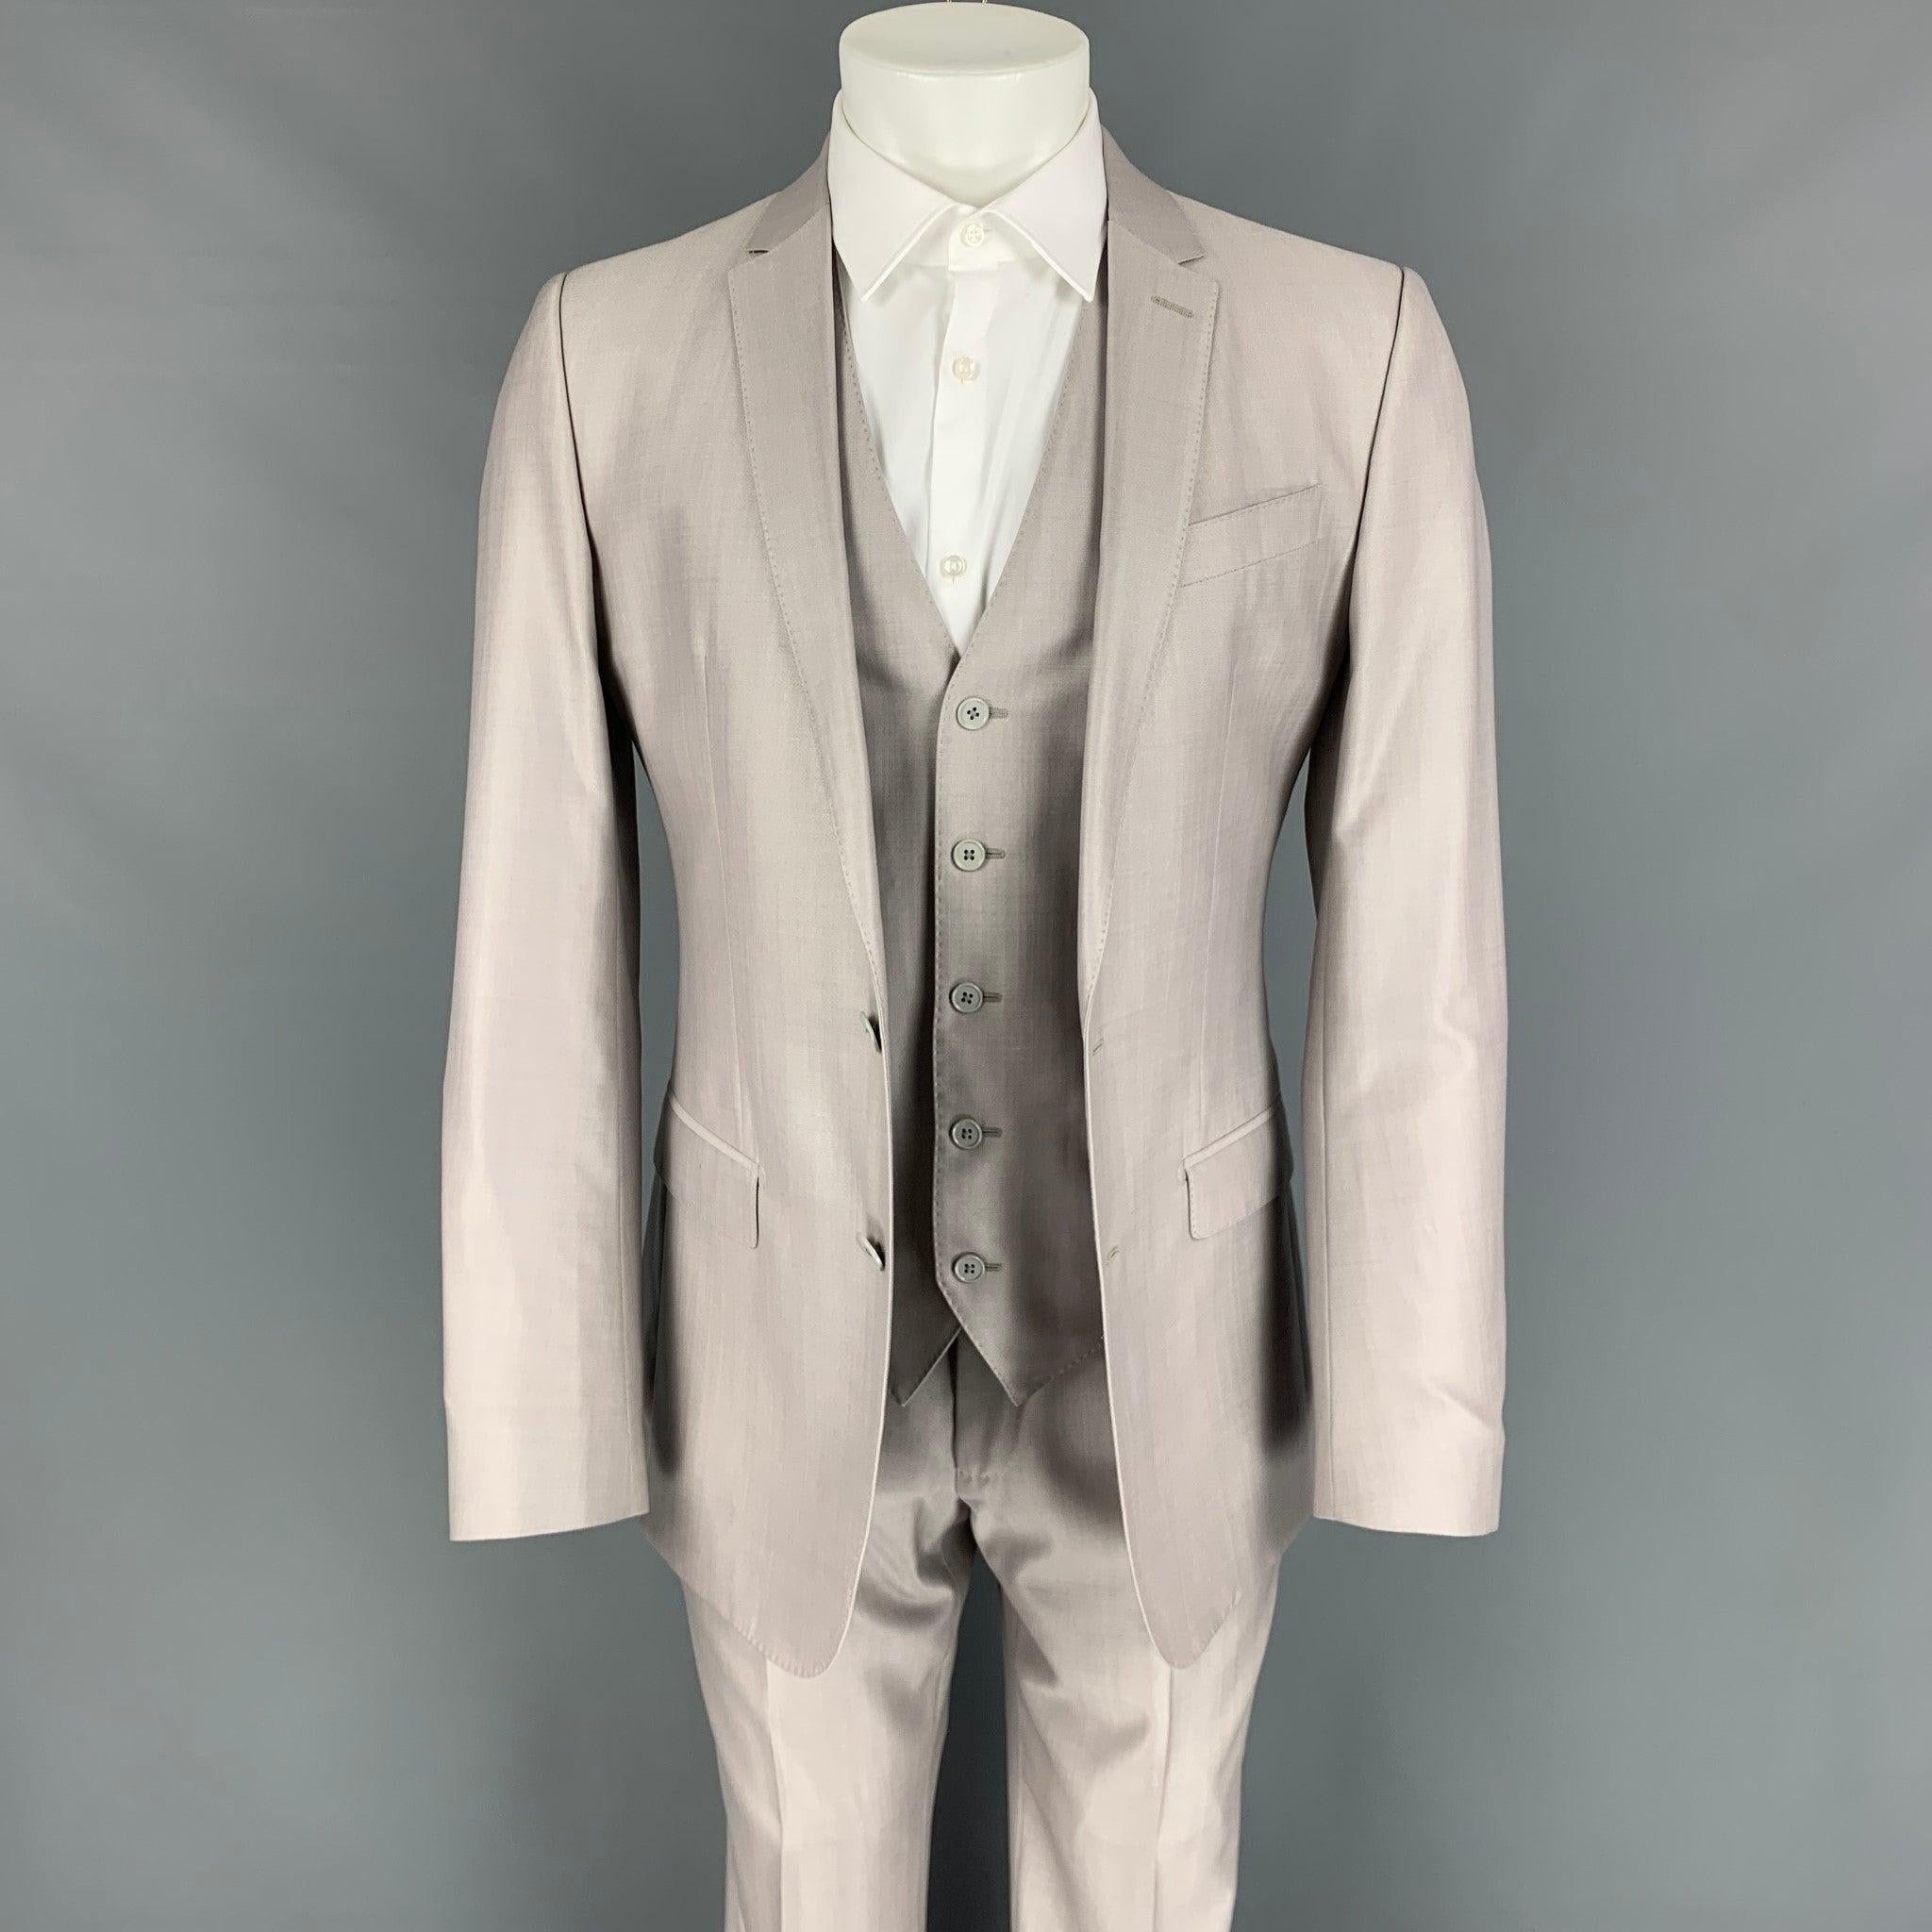 DOLCE & GABBANA Martini Size 36 Long Light Grey Wool / Silk 3 Piece Suit In Good Condition For Sale In San Francisco, CA